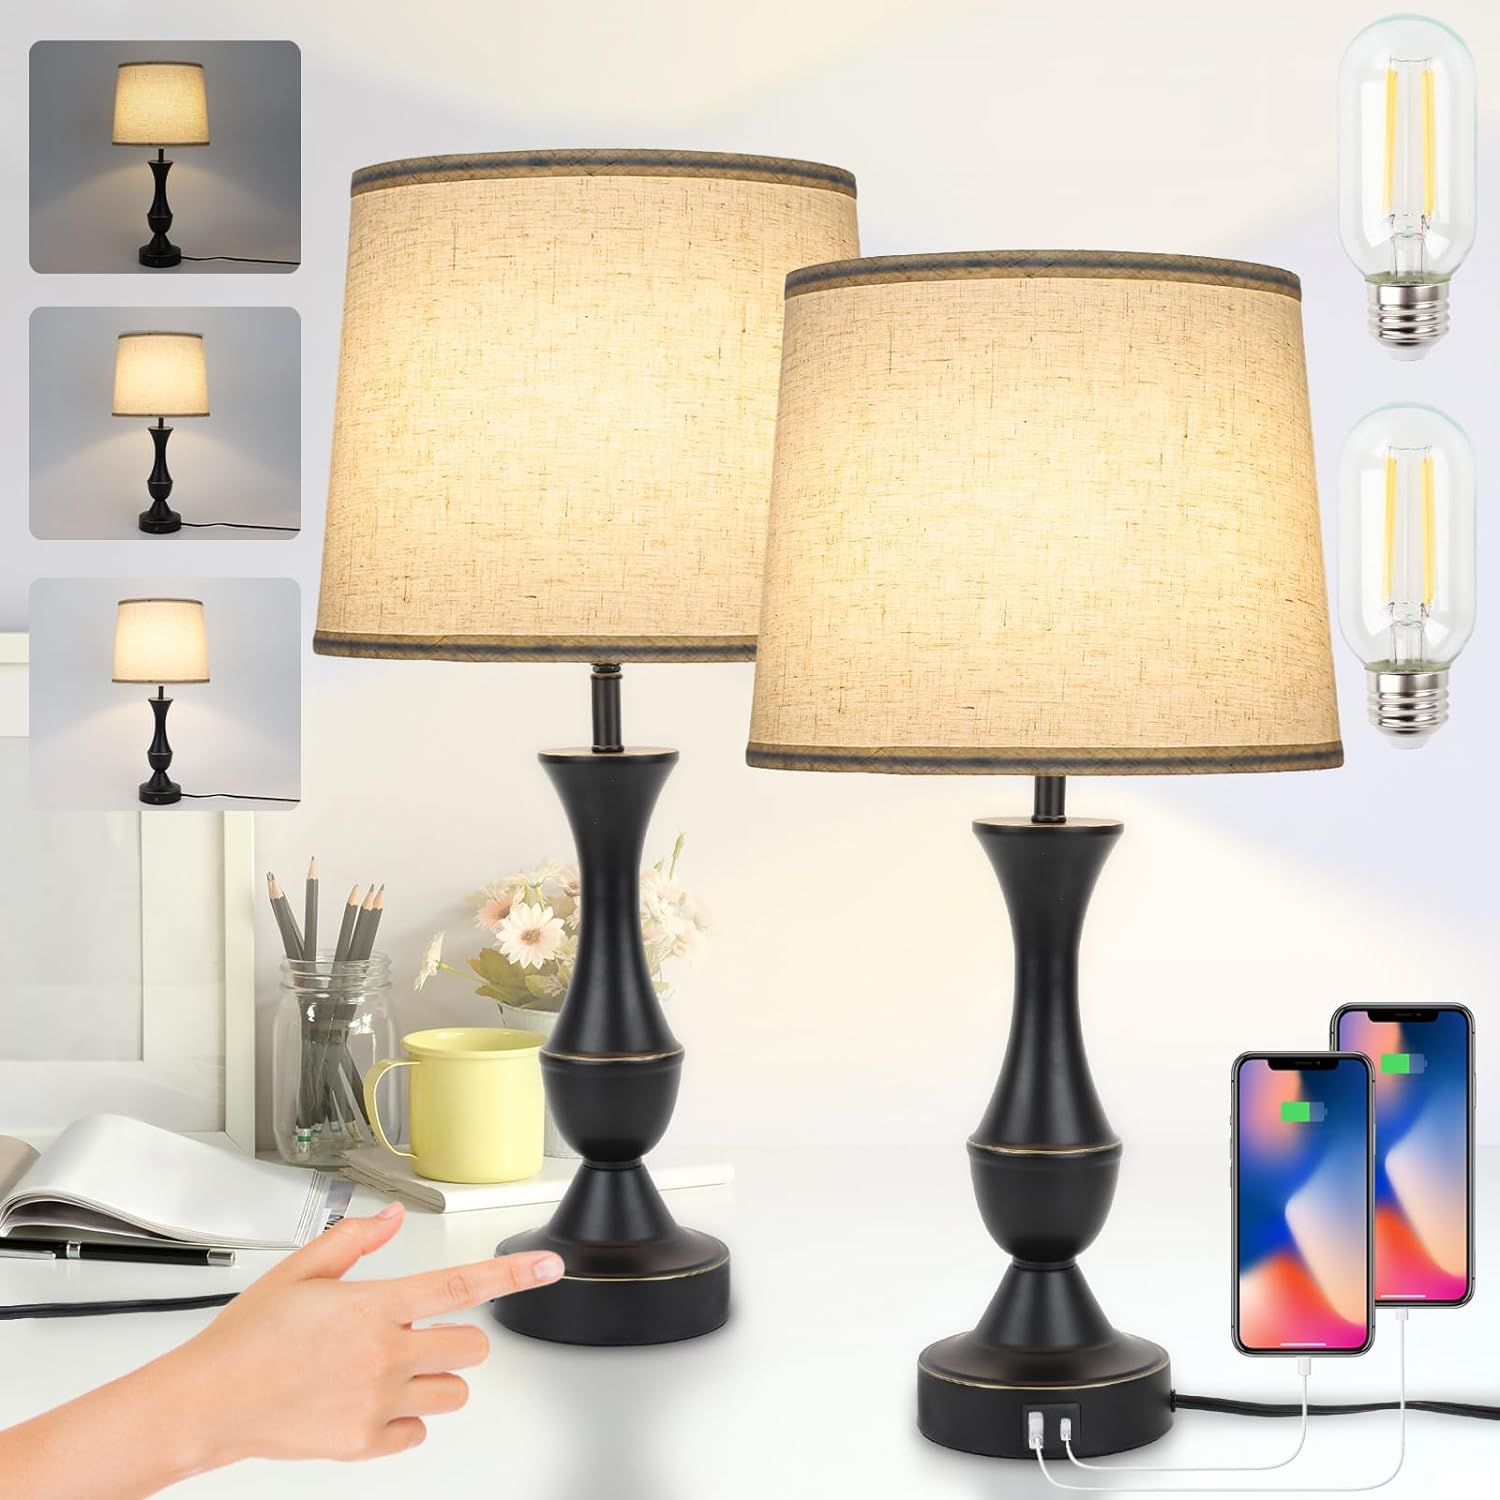 Touch Lamps for Bedrooms Set of 2, Farmhouse Table Lamp with USB C Charging Port, 3 Way Dimmable Nightstand Lamps with Linen Fabric Lampshade for Bedroom, Living Room (Pack2-Black)